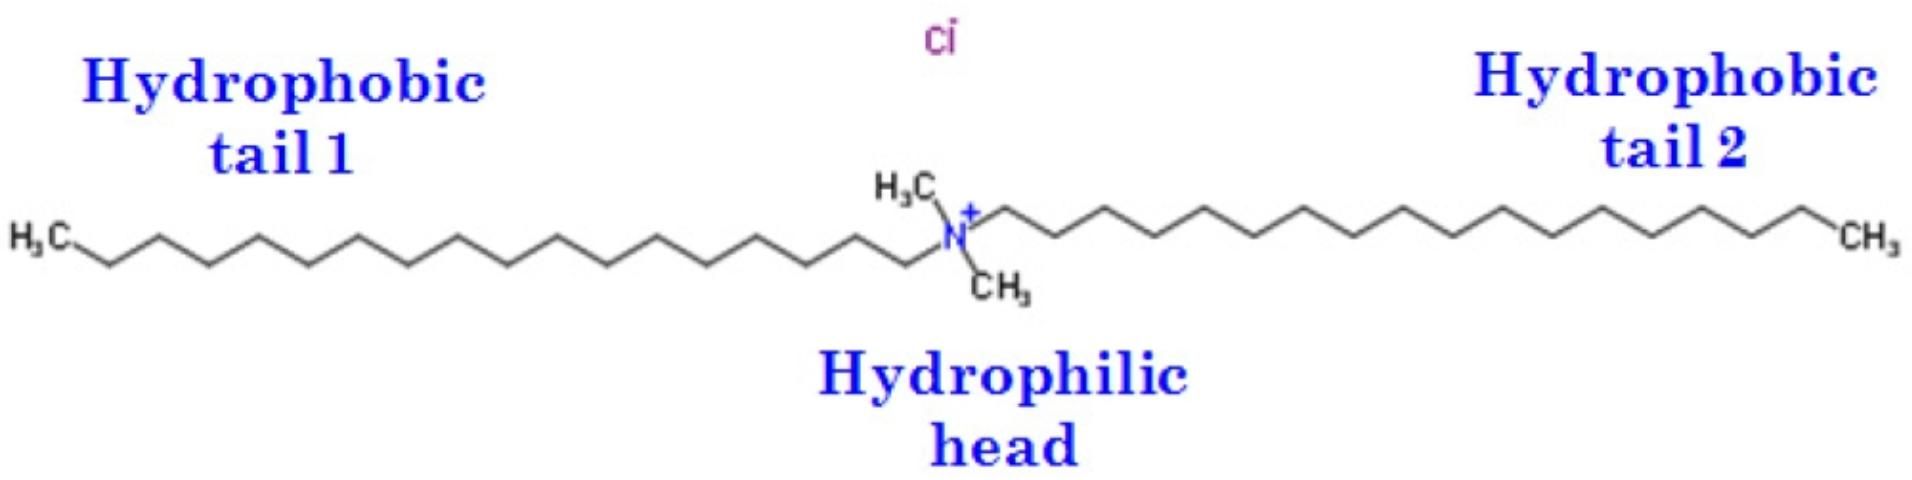 Figure 4. Chemical structure of a cationic surfactant, dimethyldioctadecylammonium chloride (DDAC). Its chemical formula is C38H80ClN. This surfactant has two 18-carbon hydrophobic tails and one positively charged nitrogen-hydrophilic head.